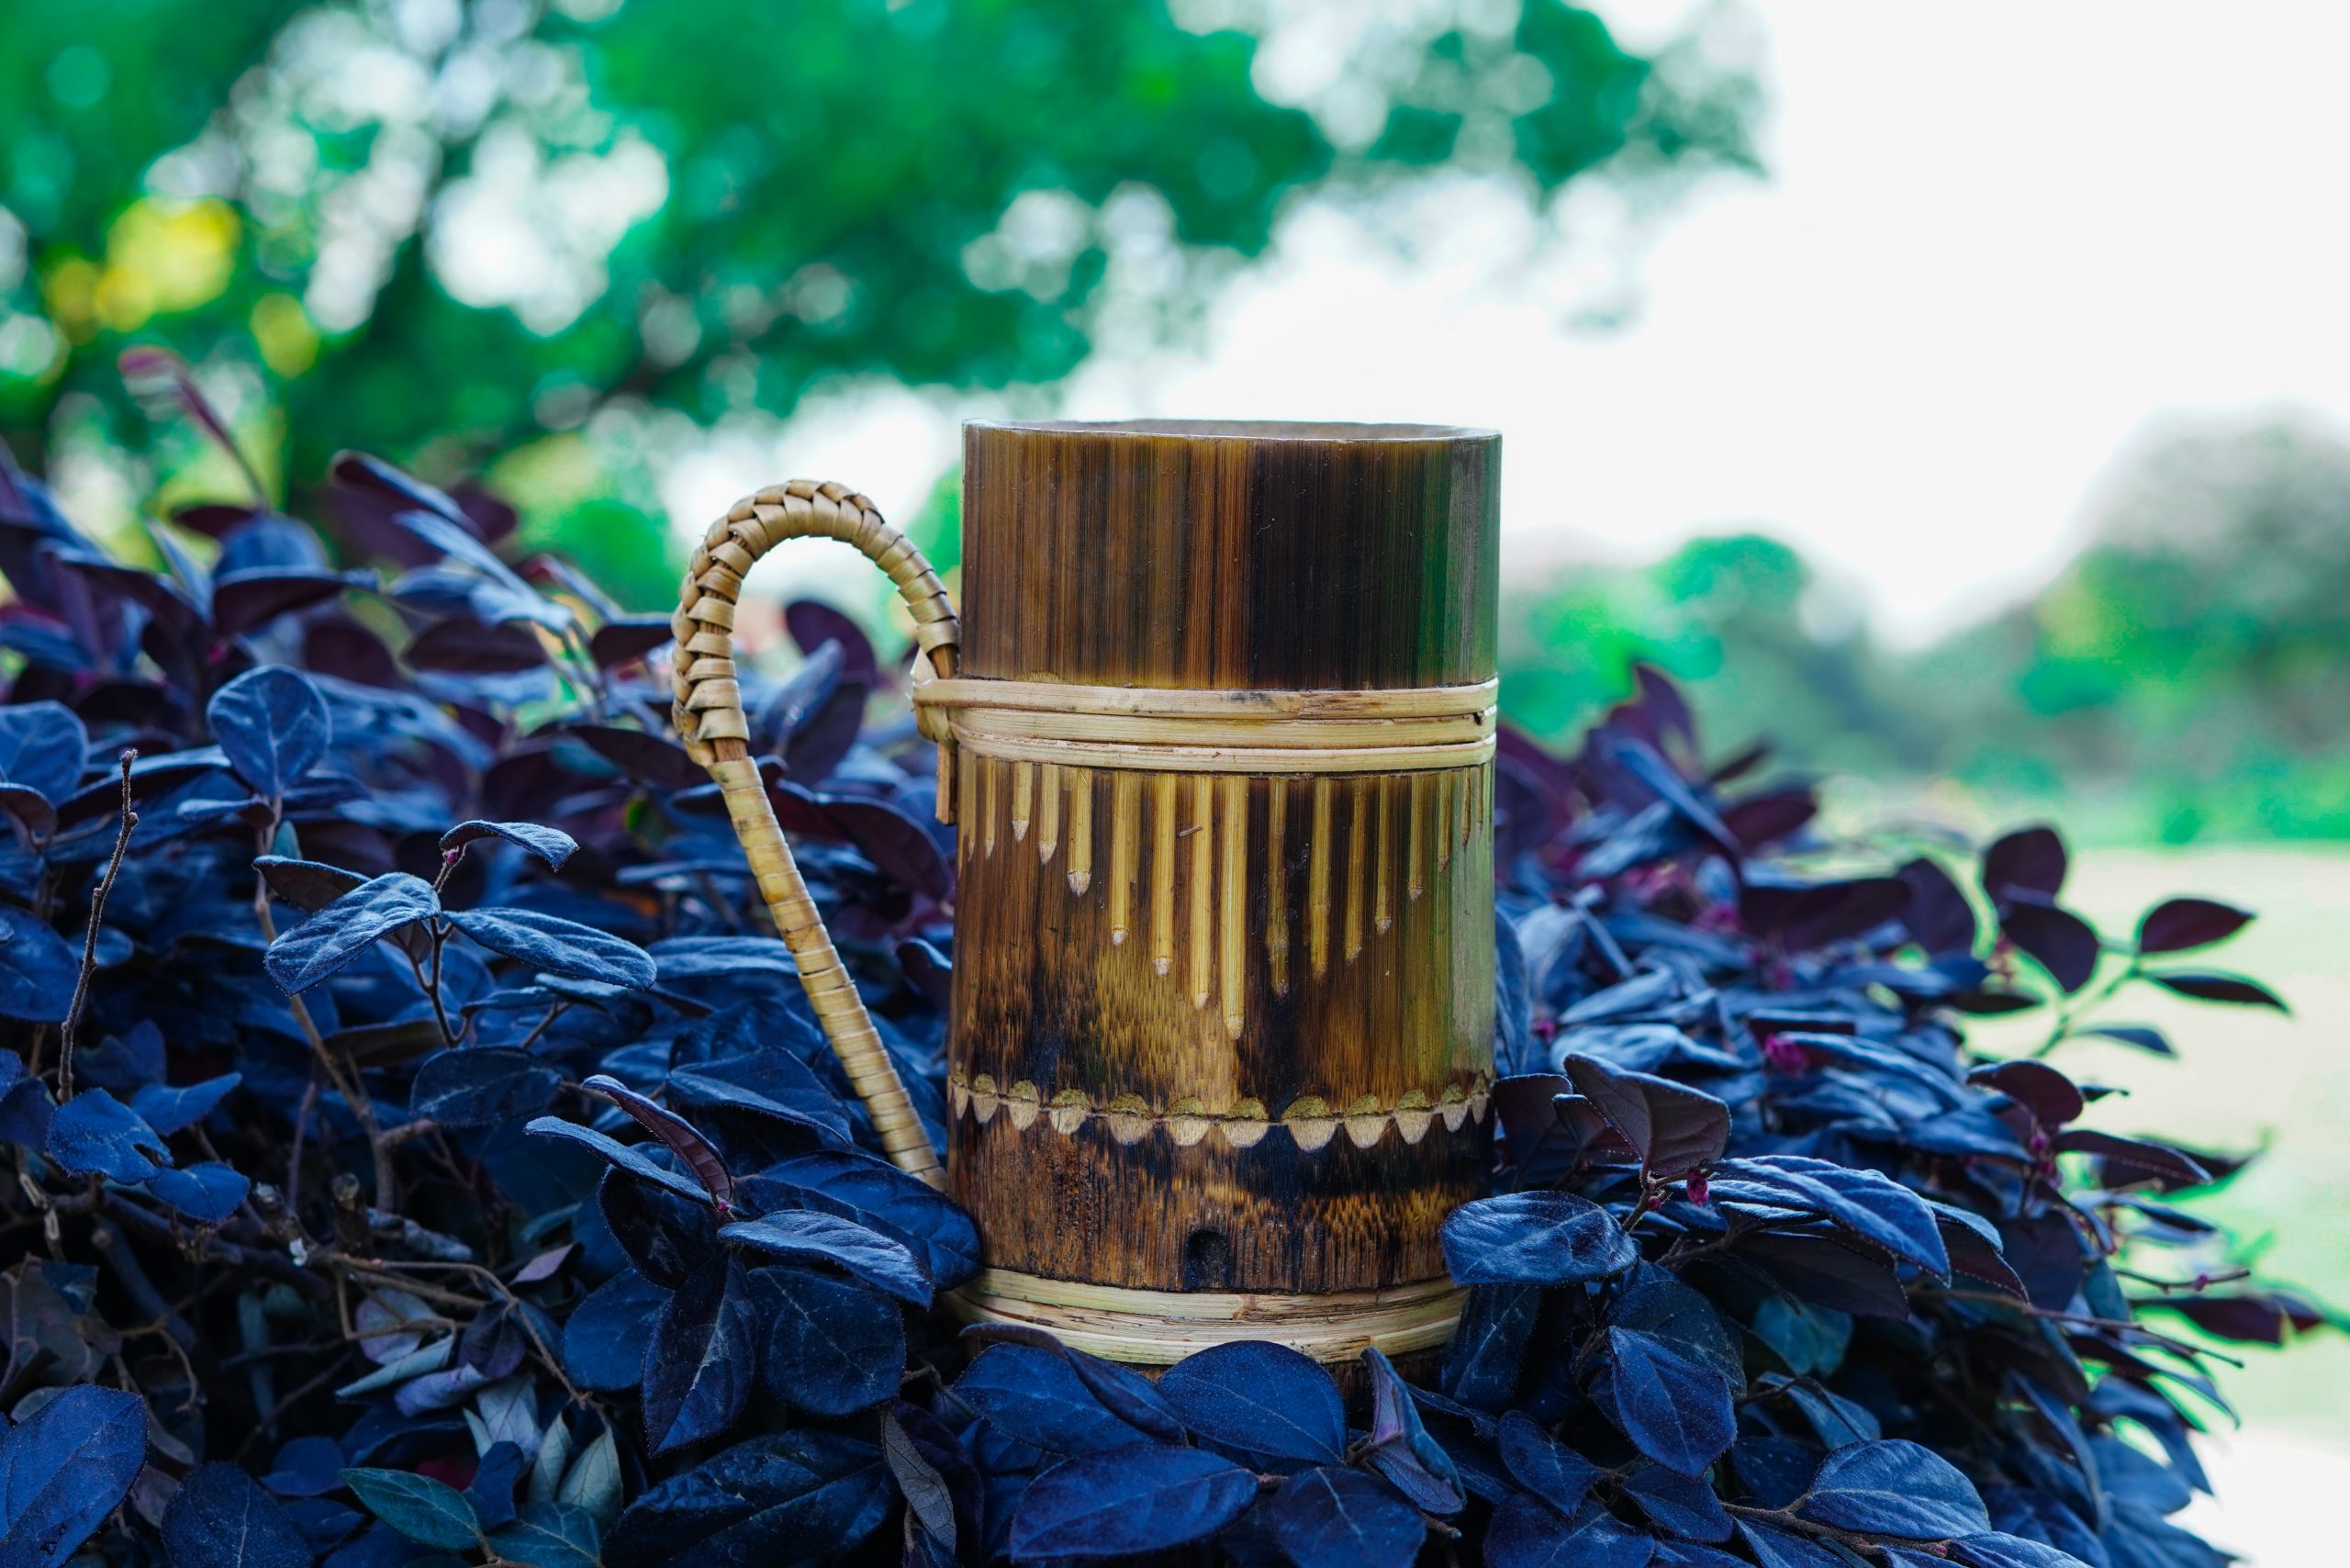 Wooden mug on the plant leaves